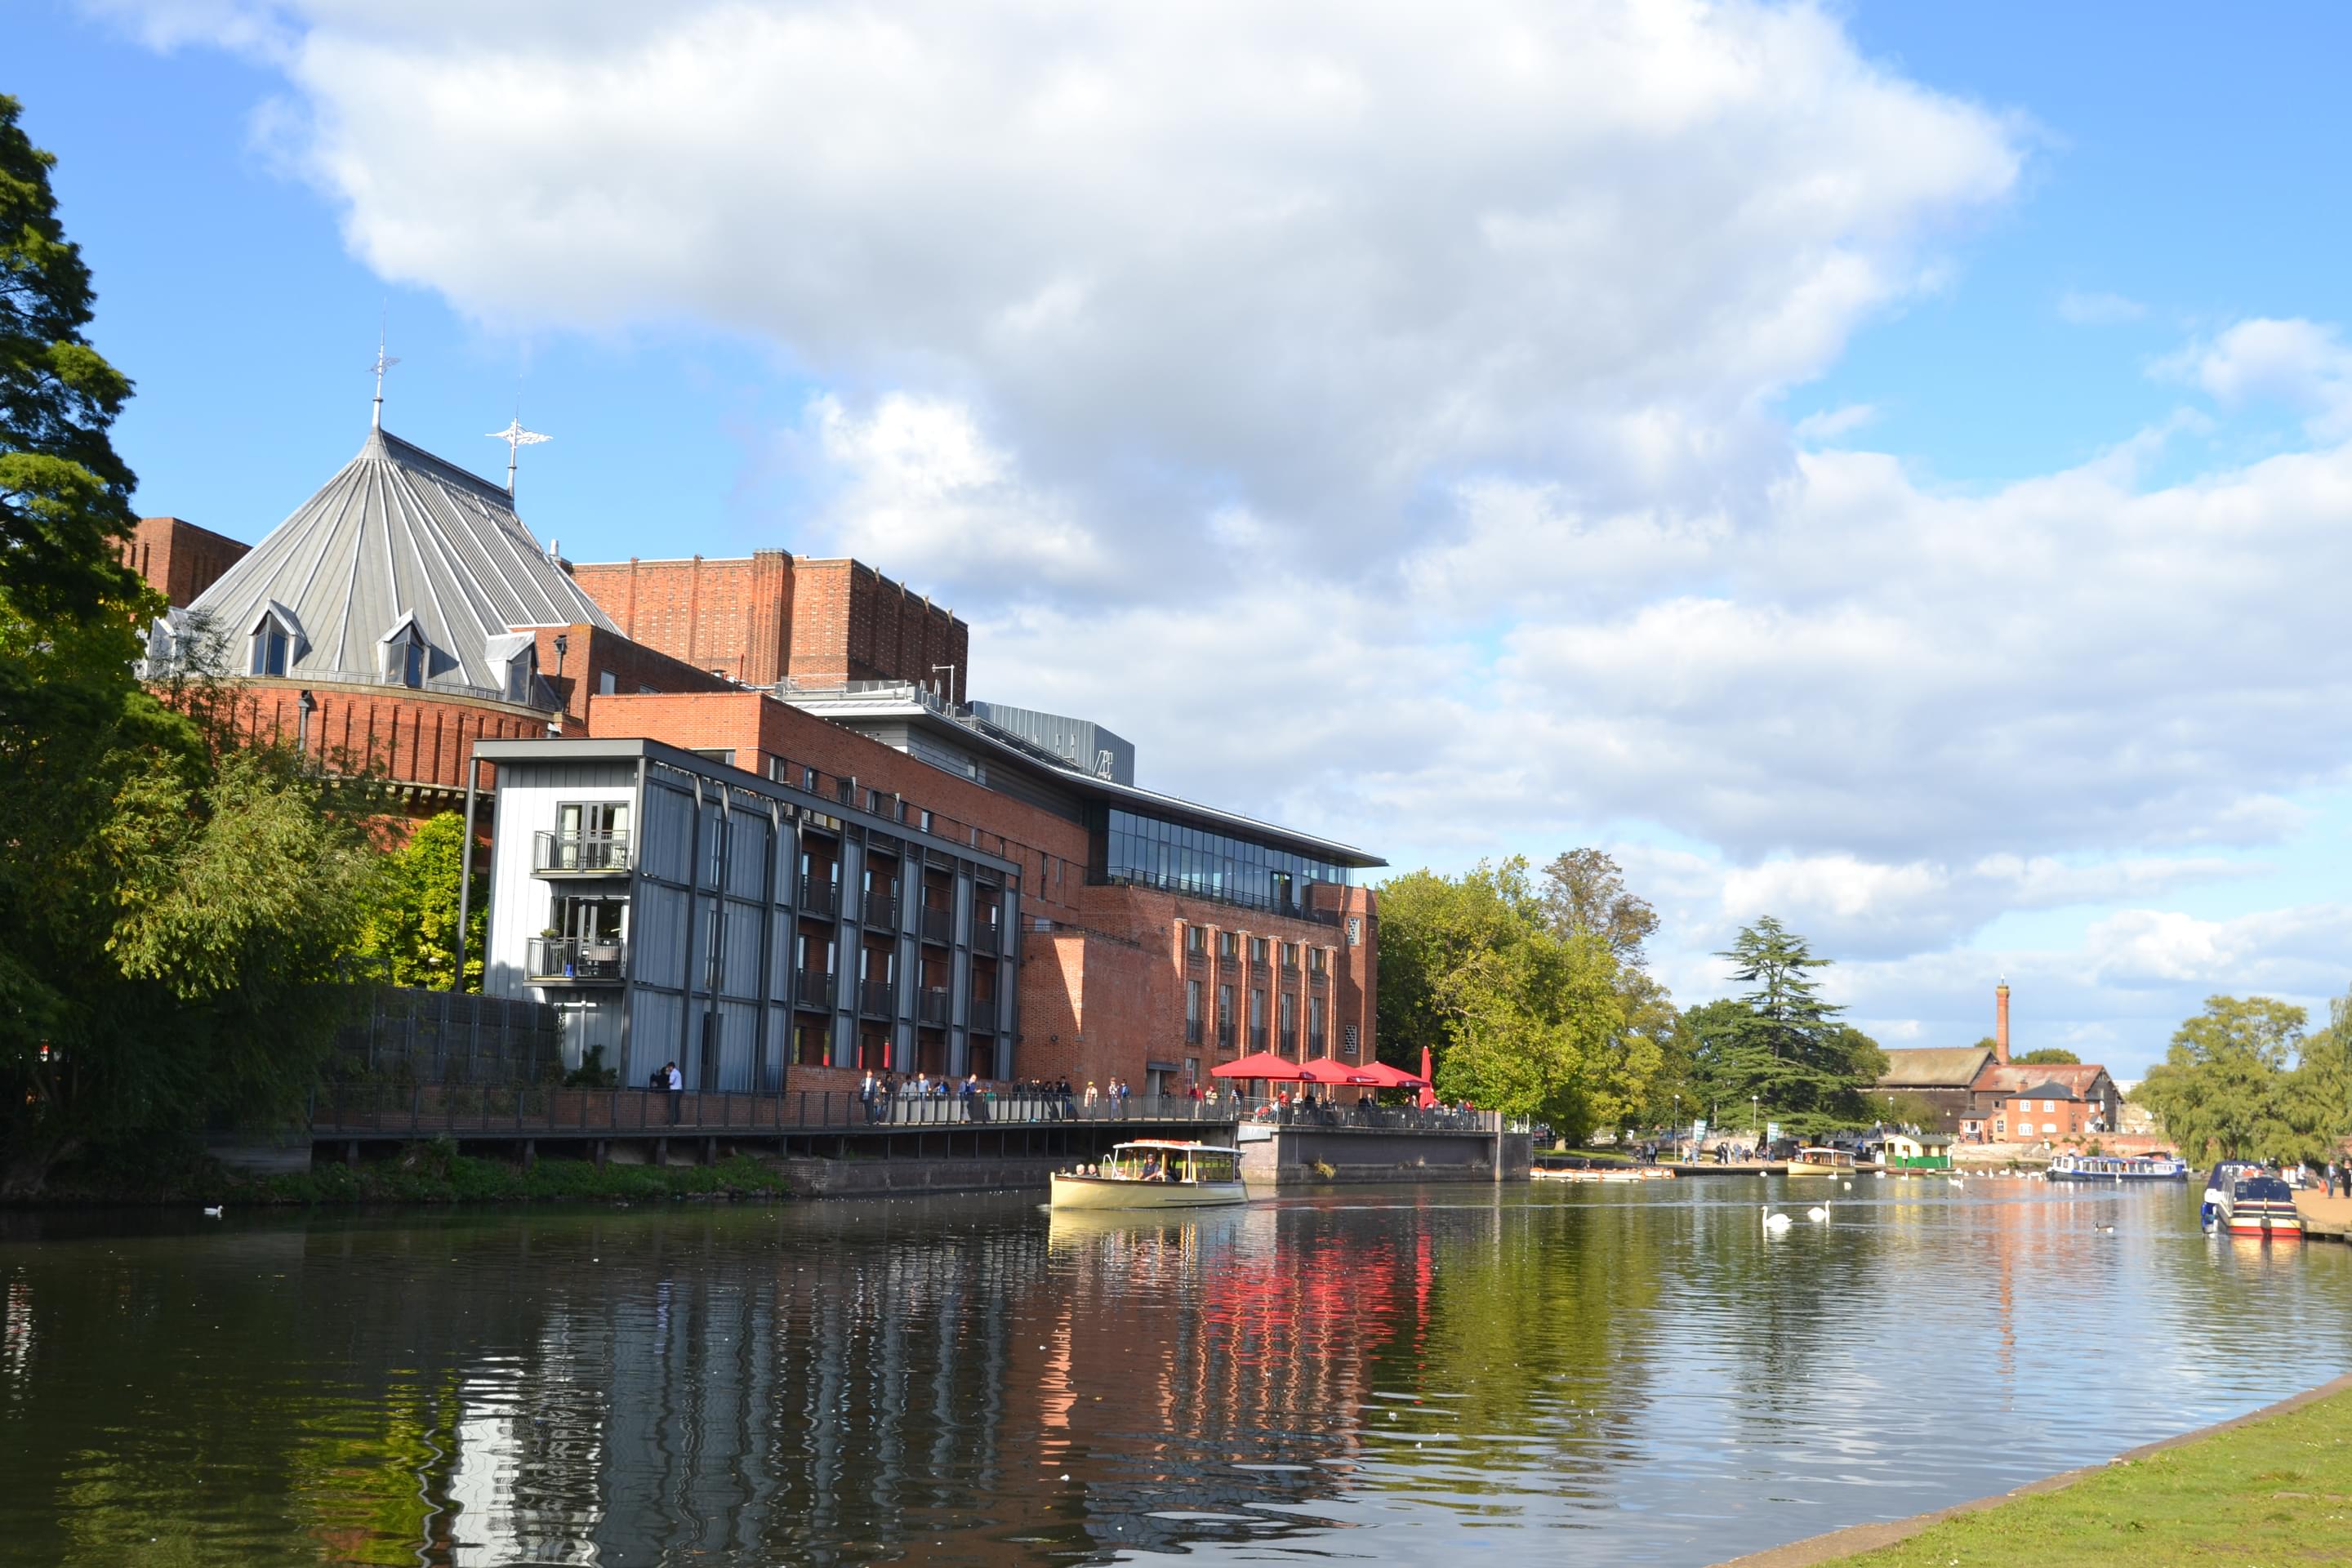 Royal Shakespeare Company Overview